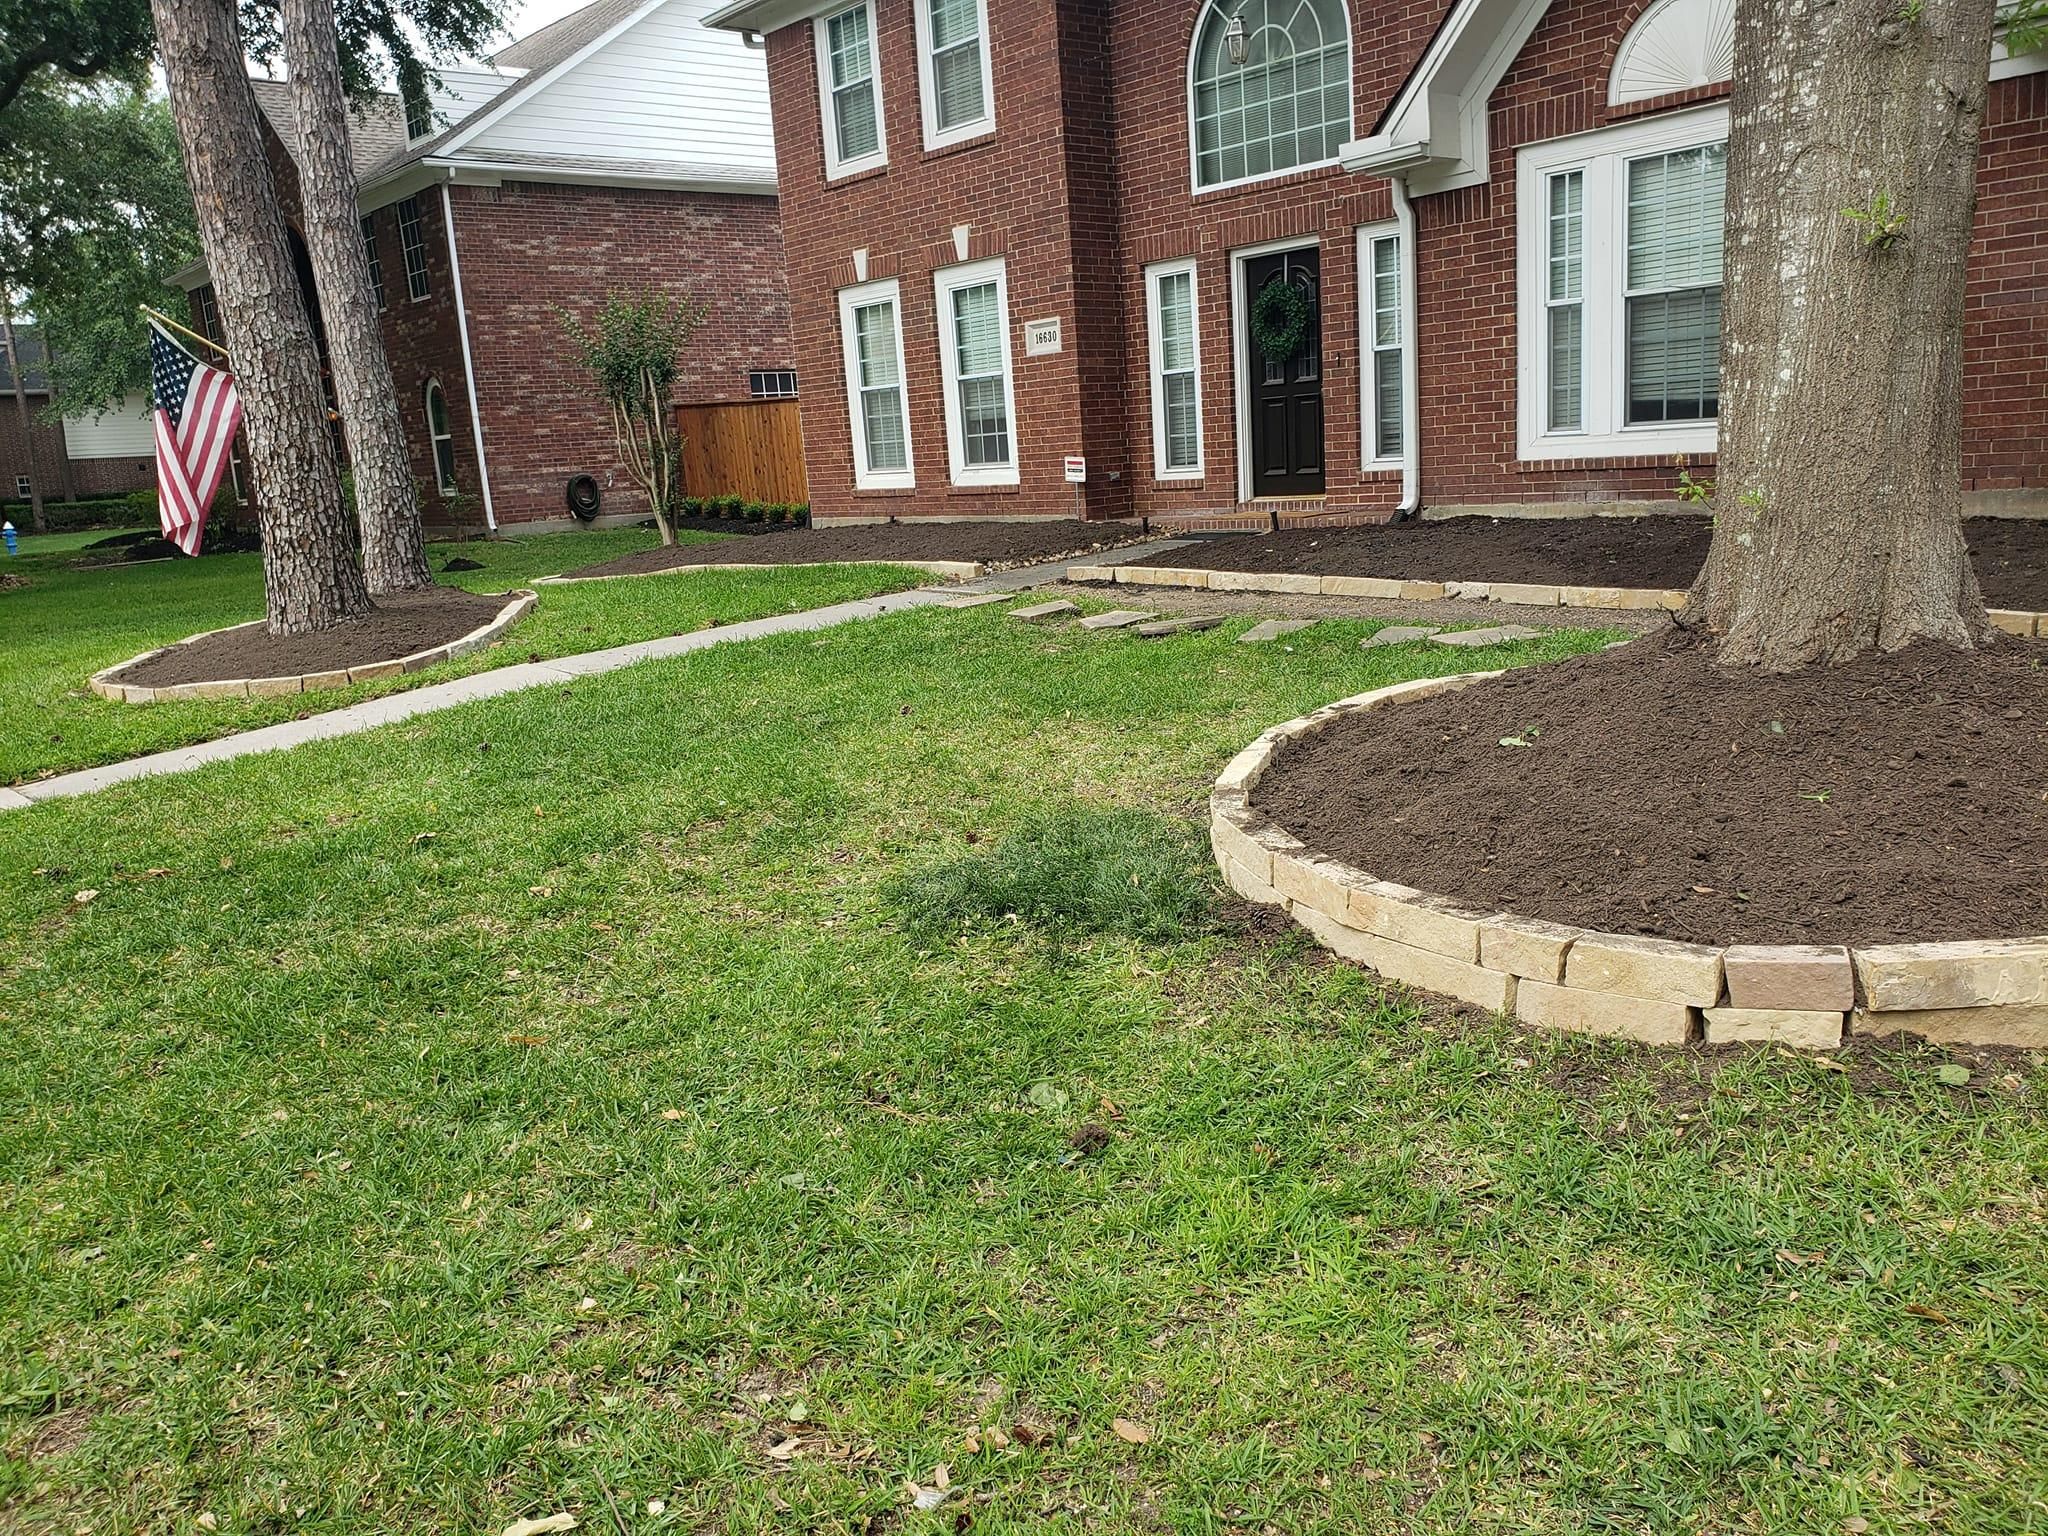 Mulch Installation for DJM Ground Services in Tomball, TX